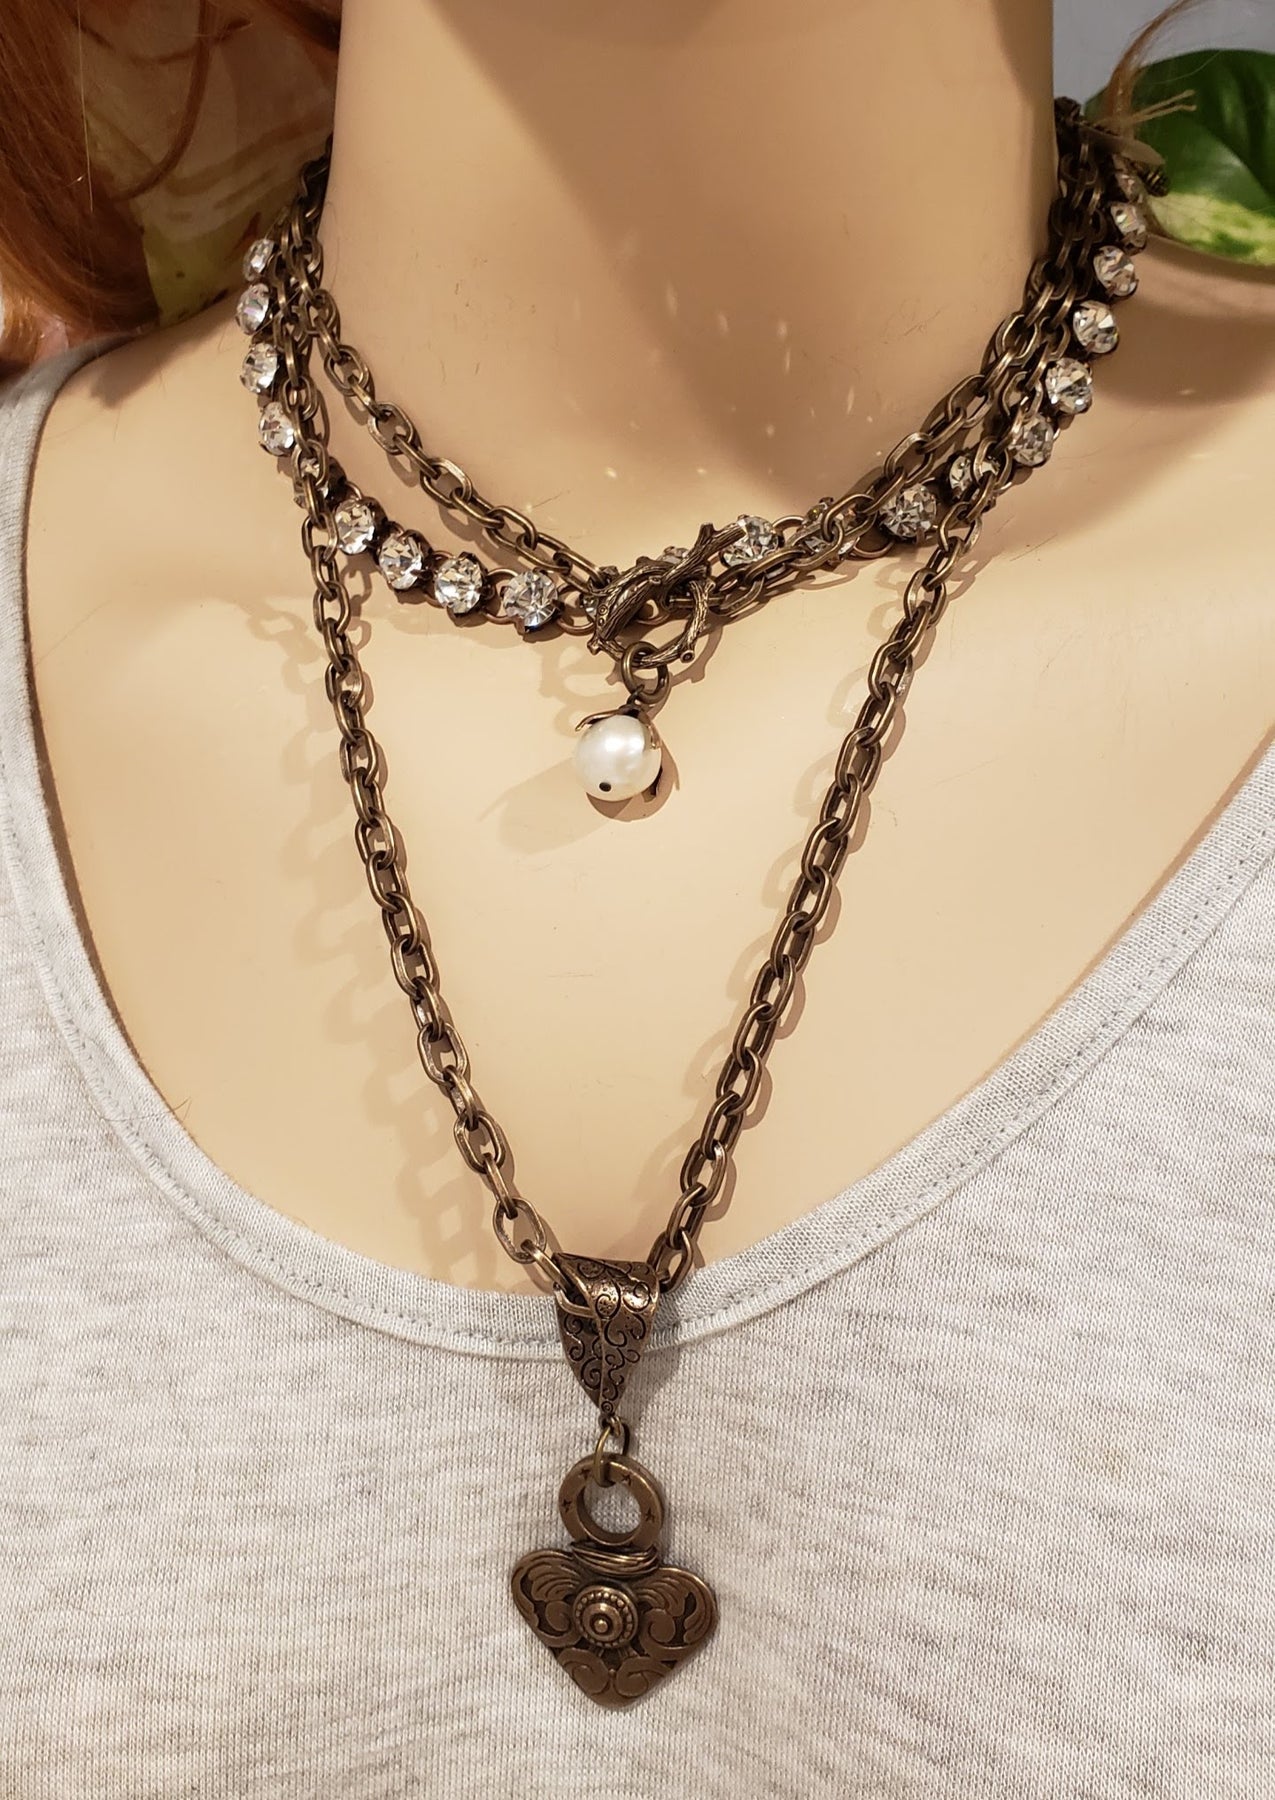 Chain with Big Rhinestones Necklace 16